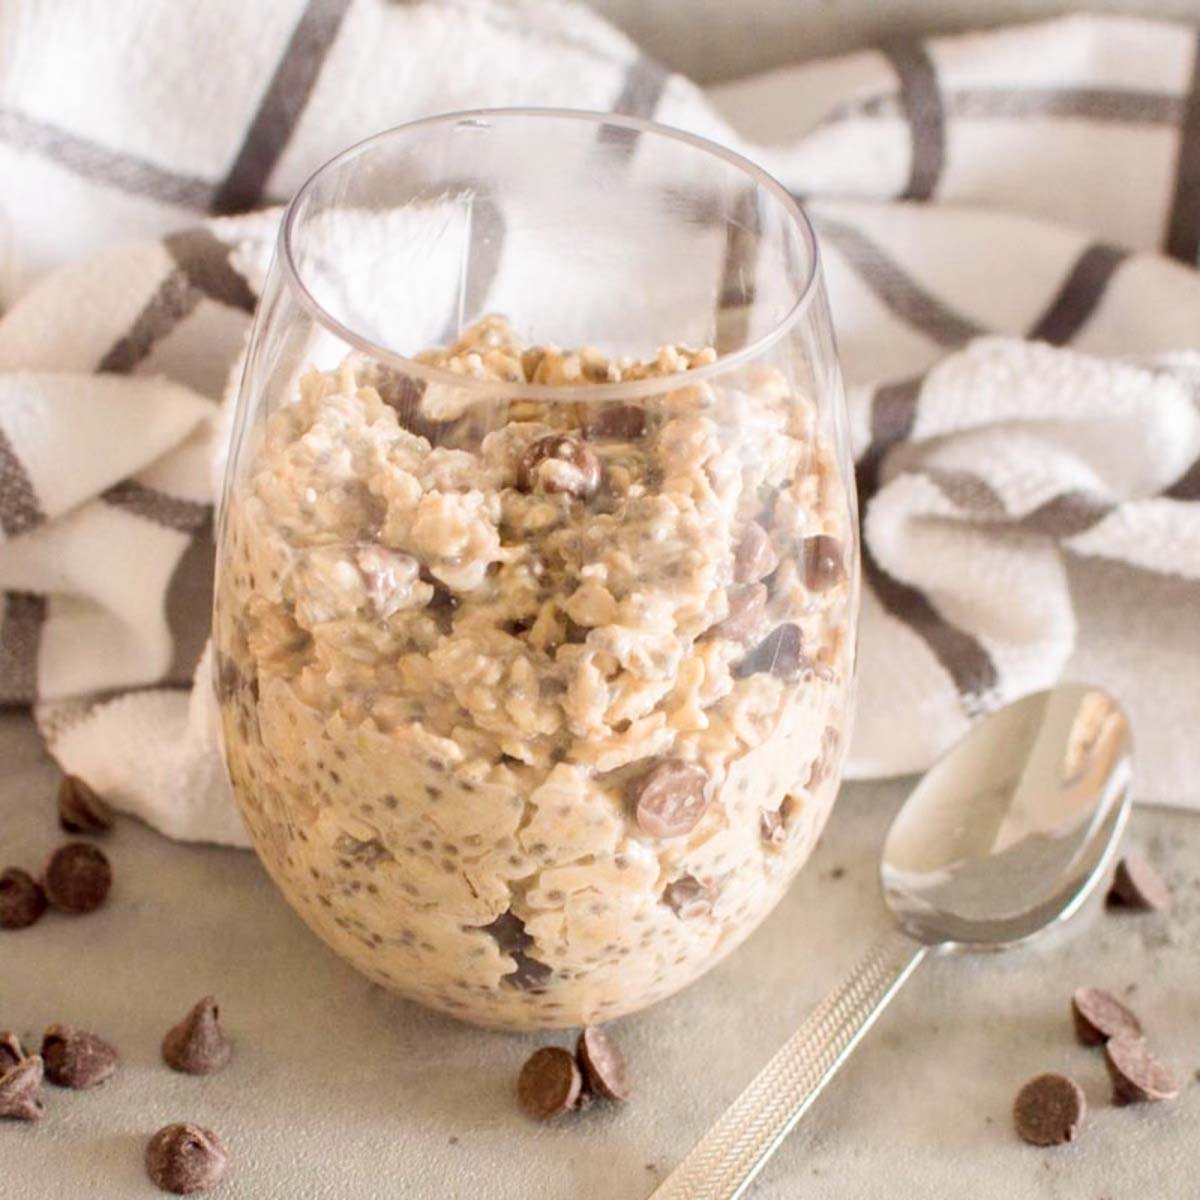 Thumbnail of overnight oats cookie dough.